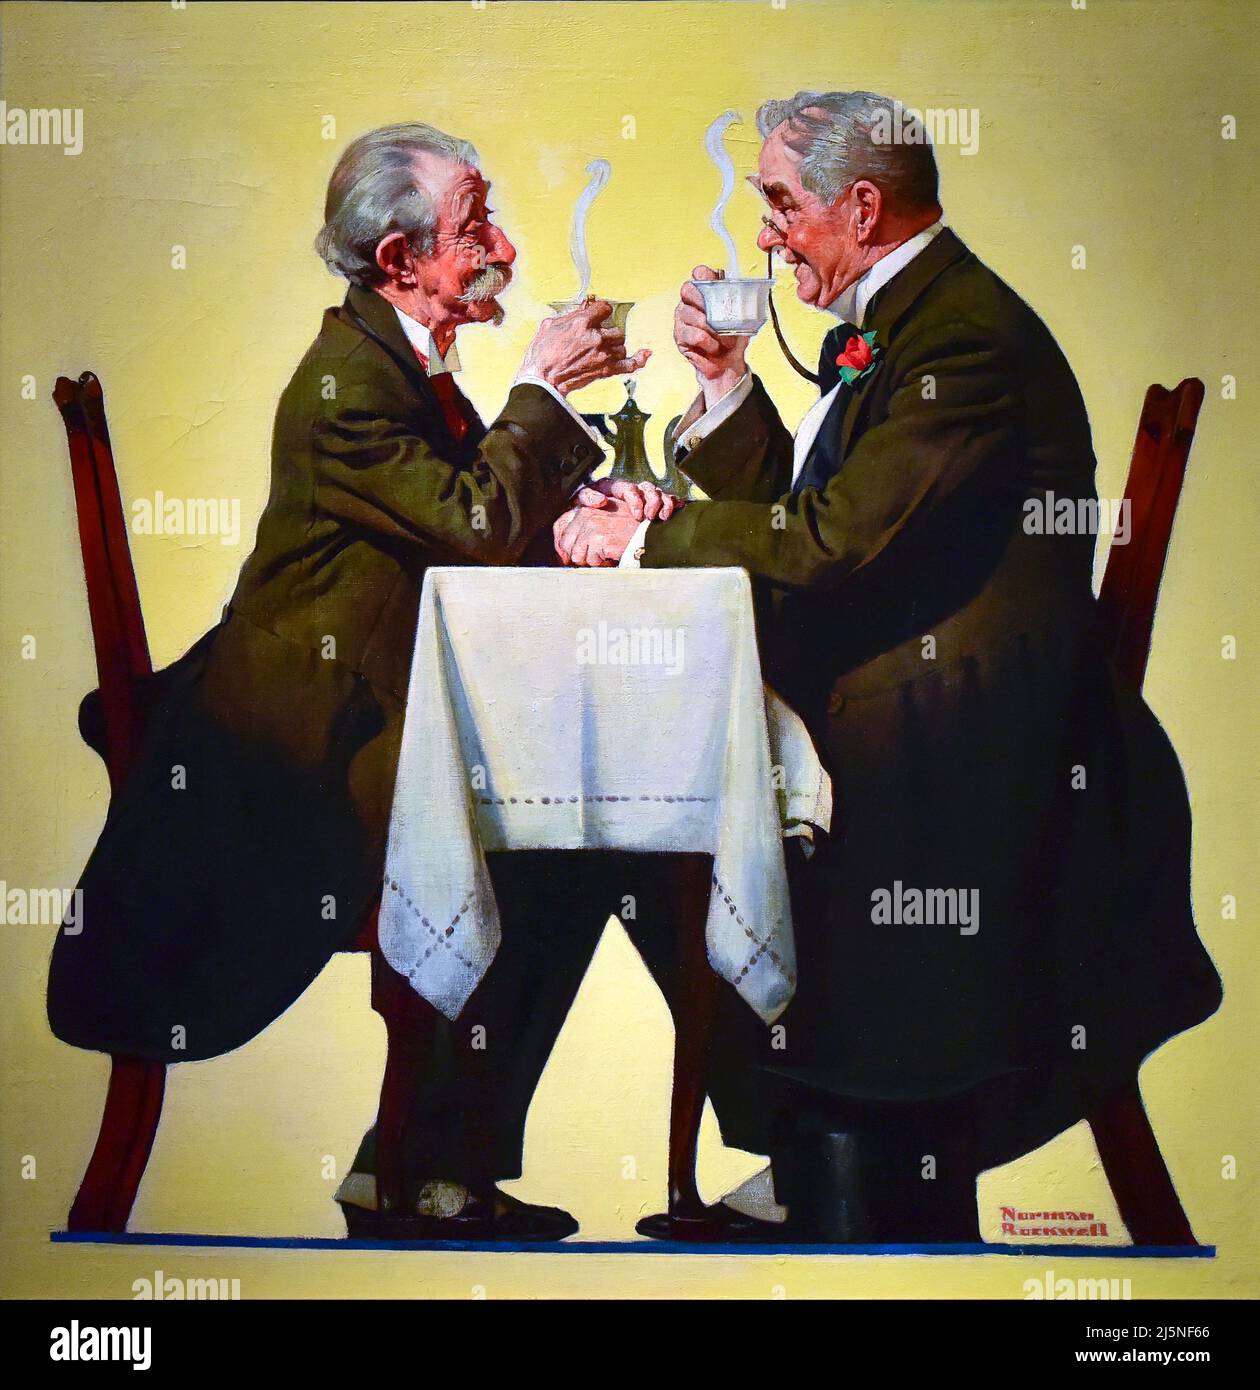 Norman Rockwell, 1930, Two Men Sharing a Pot of Coffee Stock Photo